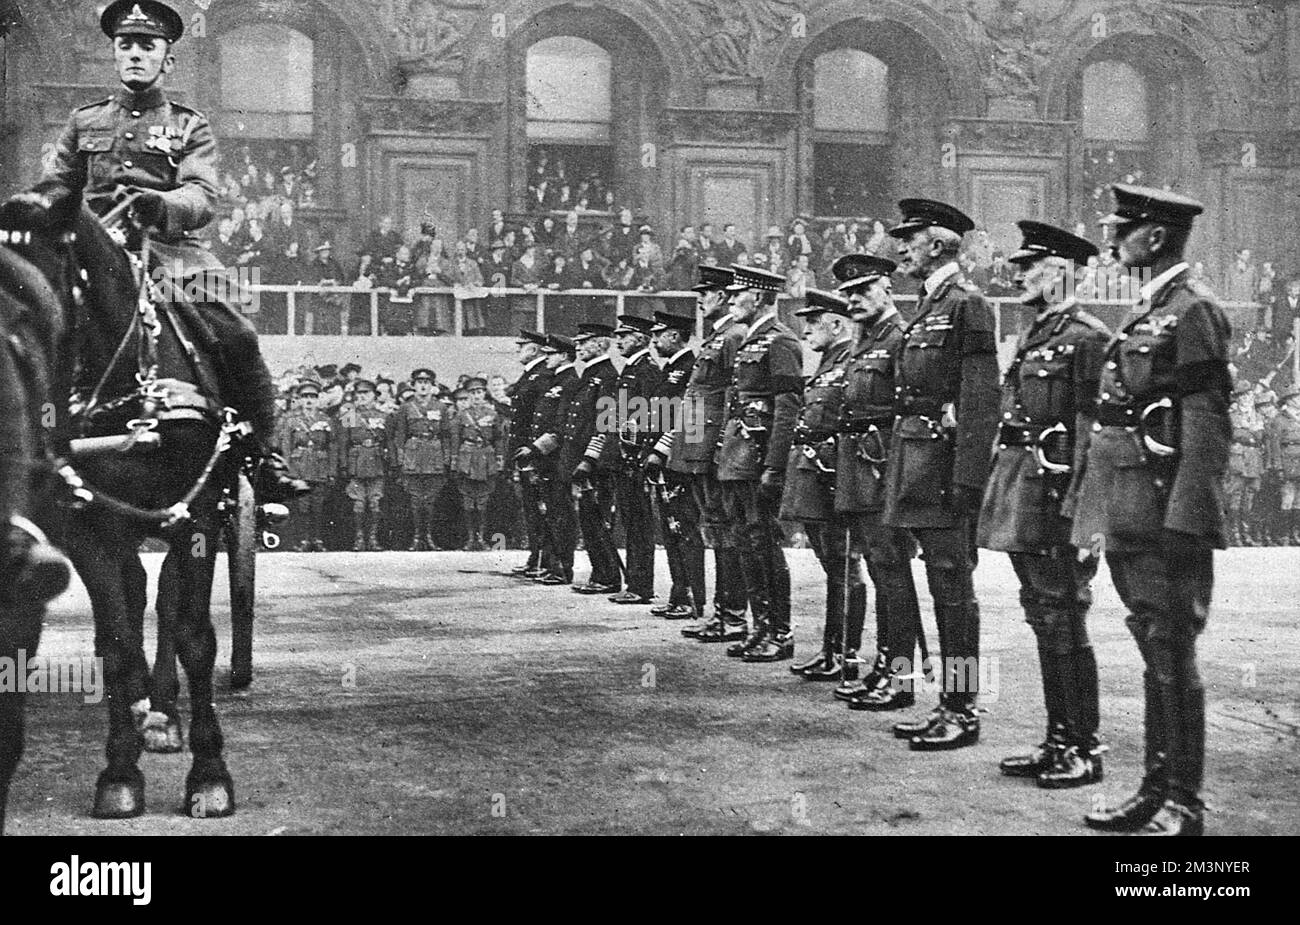 The twelve war leaders as pall bearers at the Remembrance Day service at the Cenotaph (called Armistice Day pre-World War Two) on 11th November 1920, l to r: Sir Hedworth Meux, Earl Beatty, Sir Henry Jackson, General Gatliff (Royal Marines), Sir Charles Madden, Air-Marshal Sir Hugh Trenchard, Lord Methuen, Lord French, Earl Haig, Sir Henry Wilson, Lord Horne, and Lord Byng - men of the highest distinction in the four services.  11th November 1920 Stock Photo